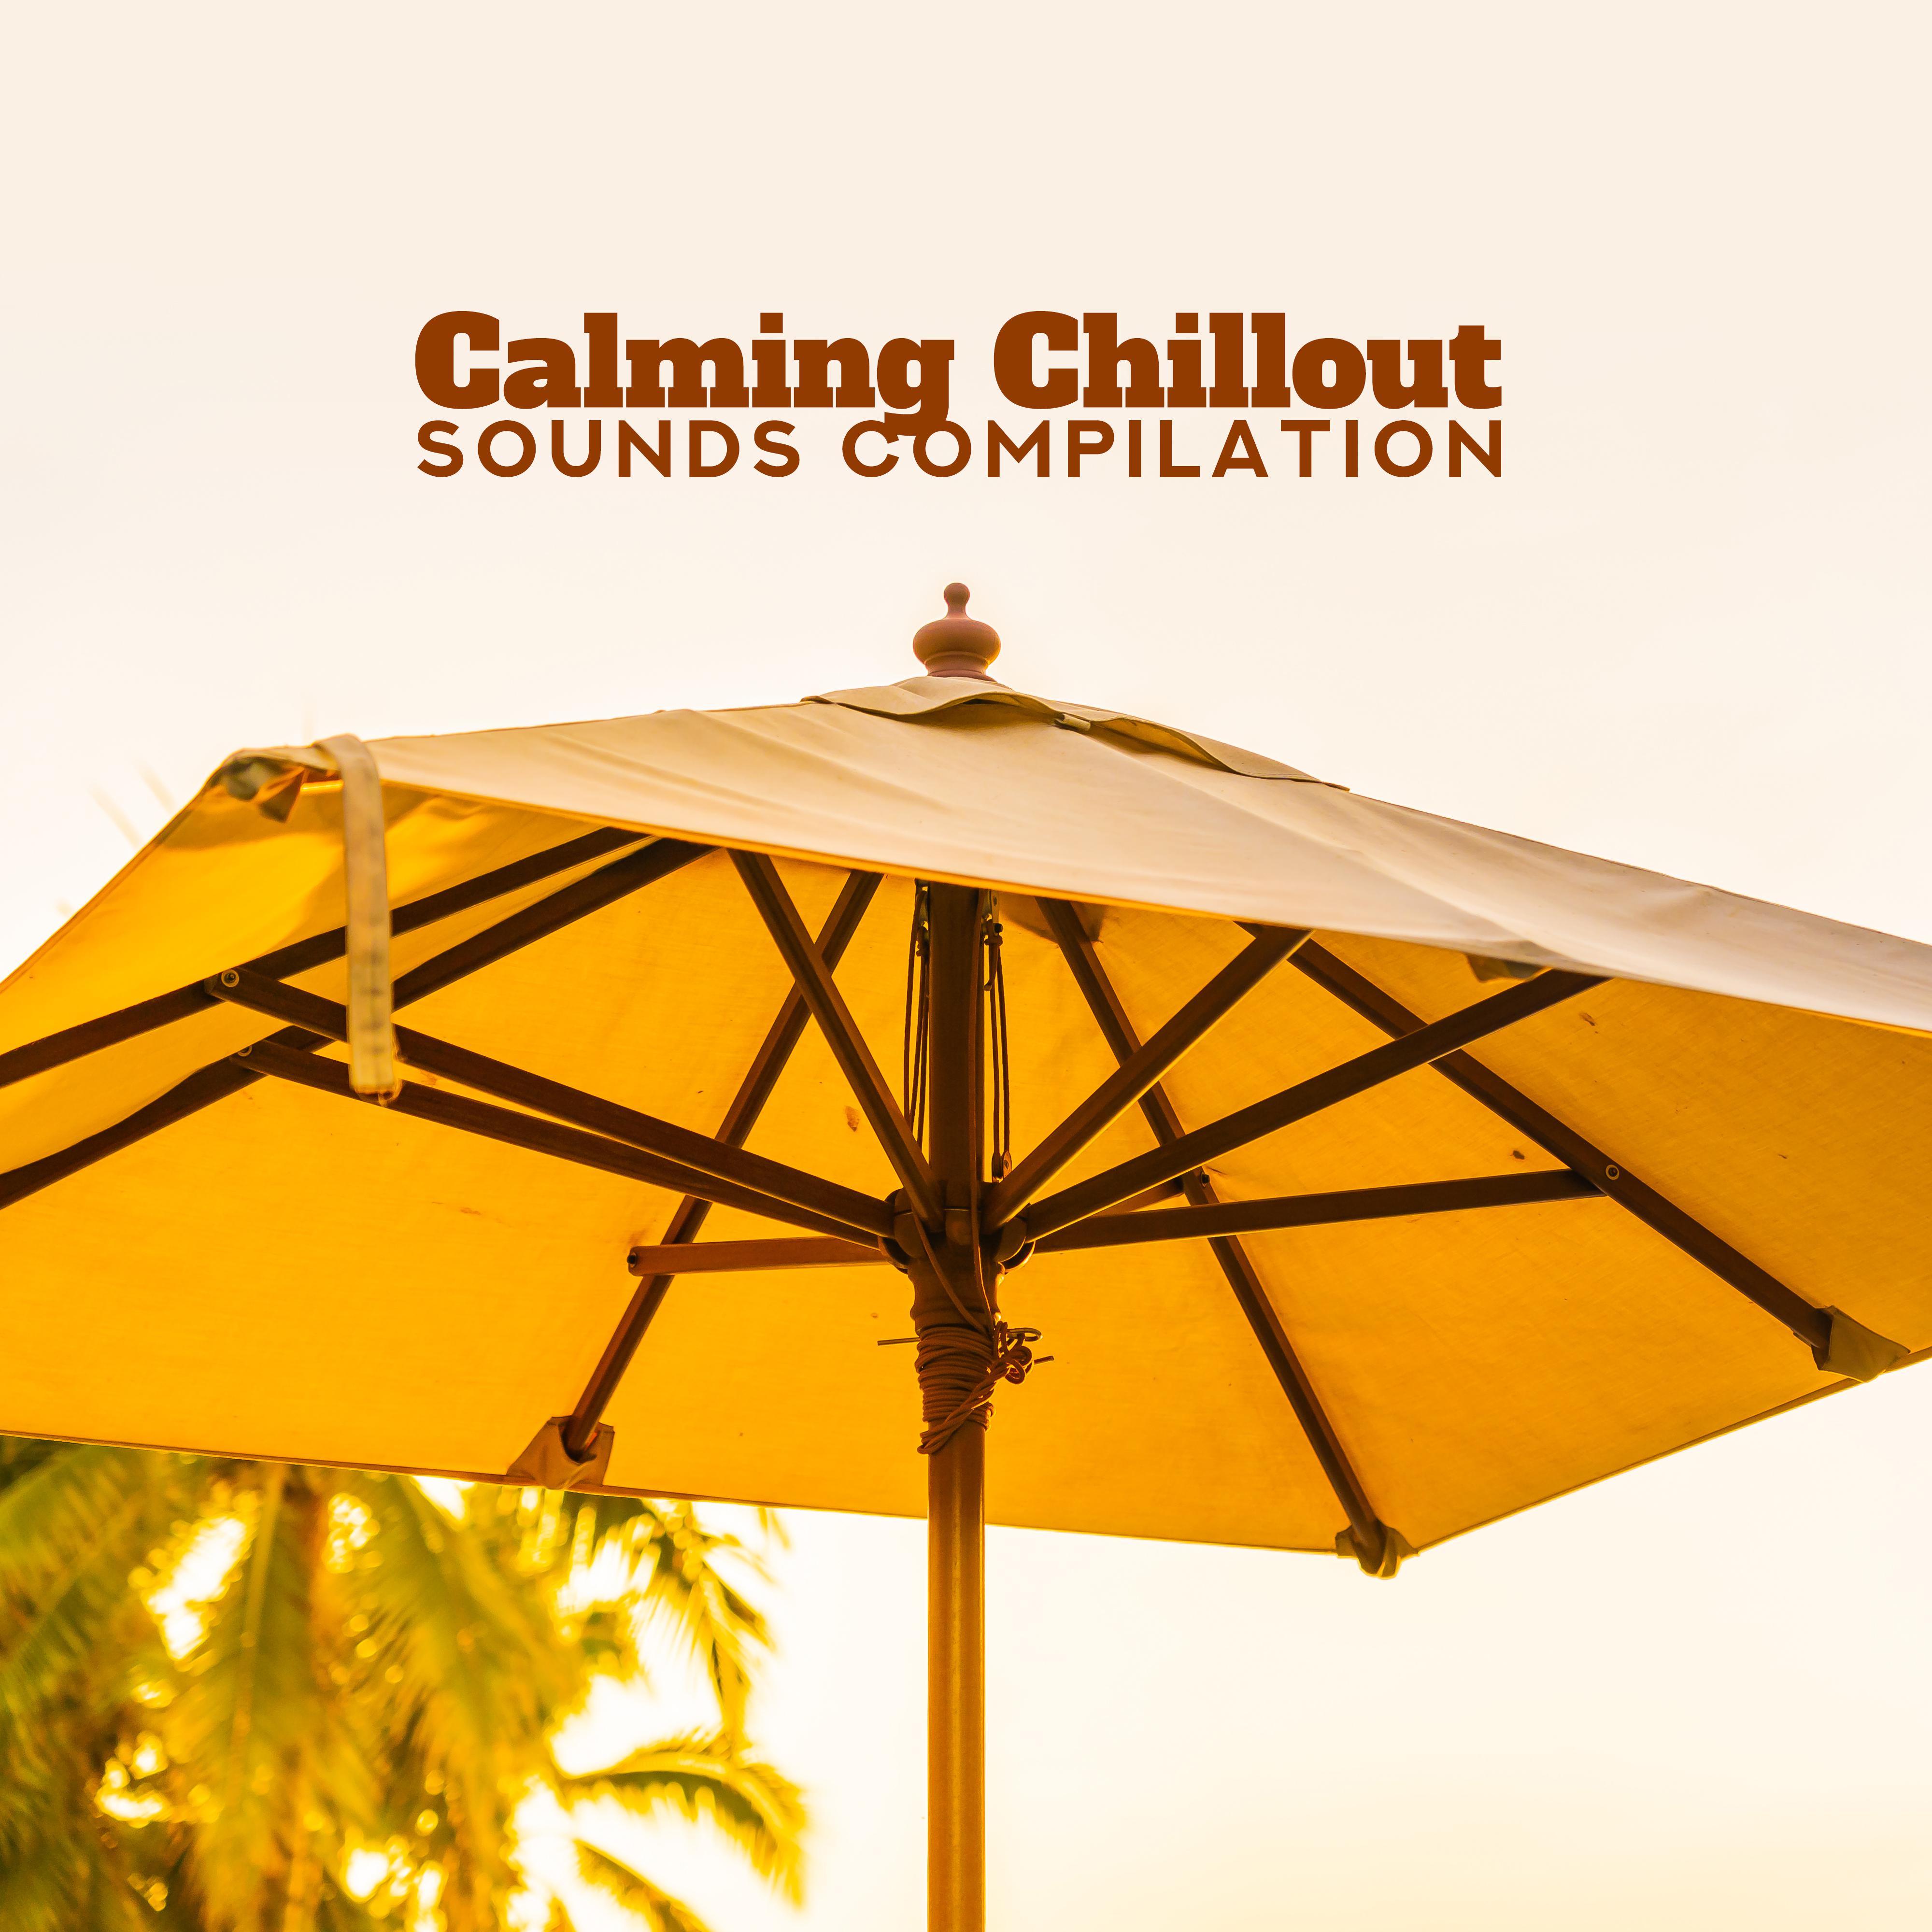 Calming Chillout Sounds Compilation – 15 Soft Electronic Beats for Total Relax, Calm Down, Stress Relief, Rest & Sleep Melodies